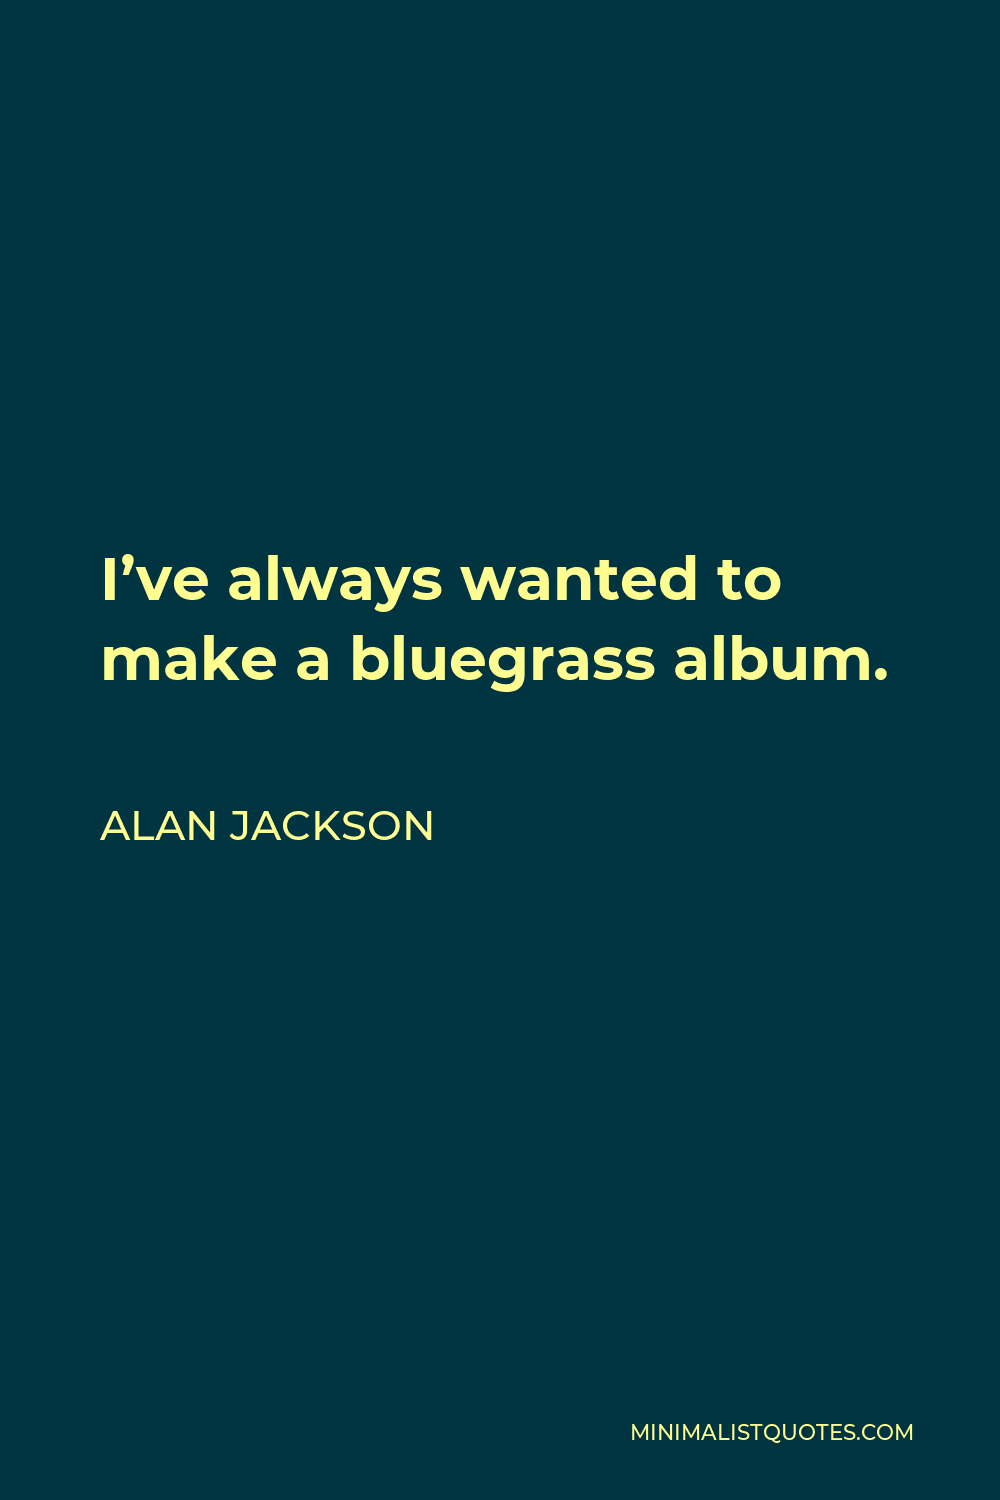 Alan Jackson Quote - I’ve always wanted to make a bluegrass album.